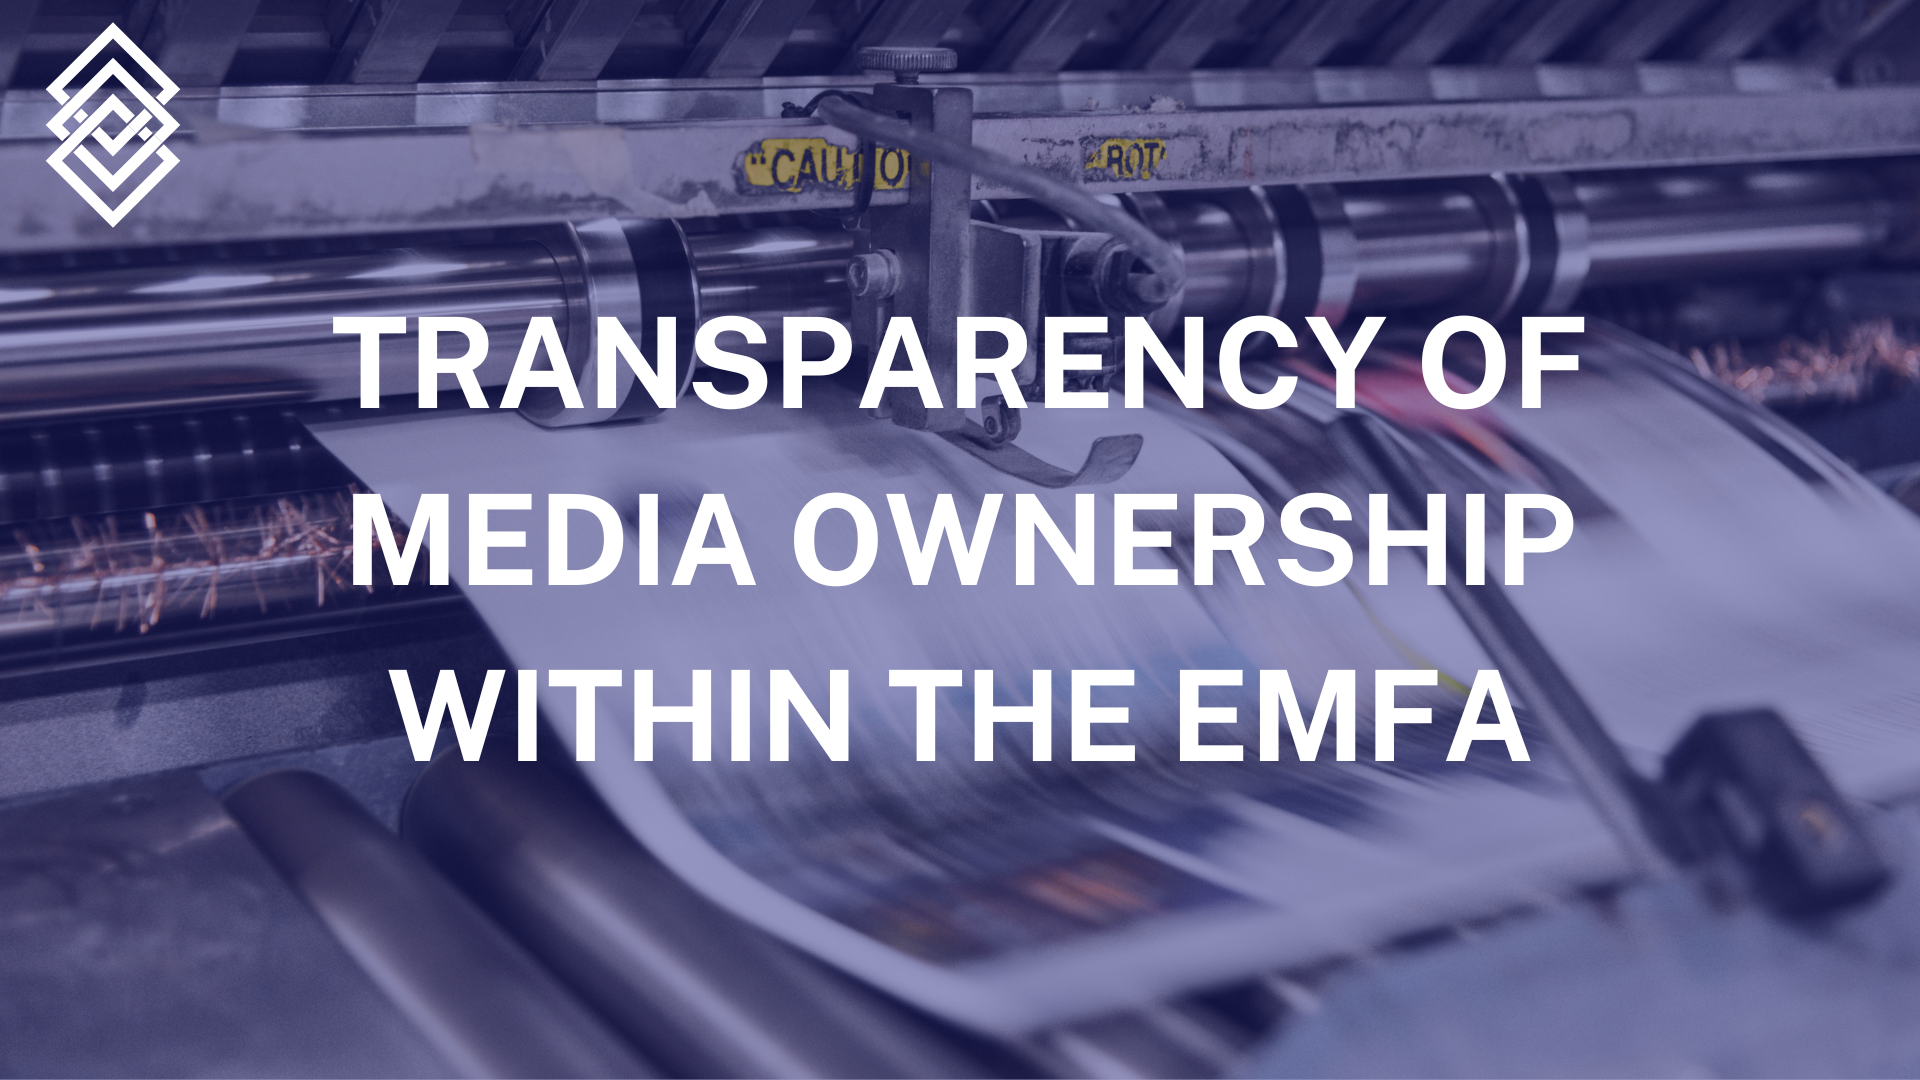 Transparency of Media Ownership within the EMFA